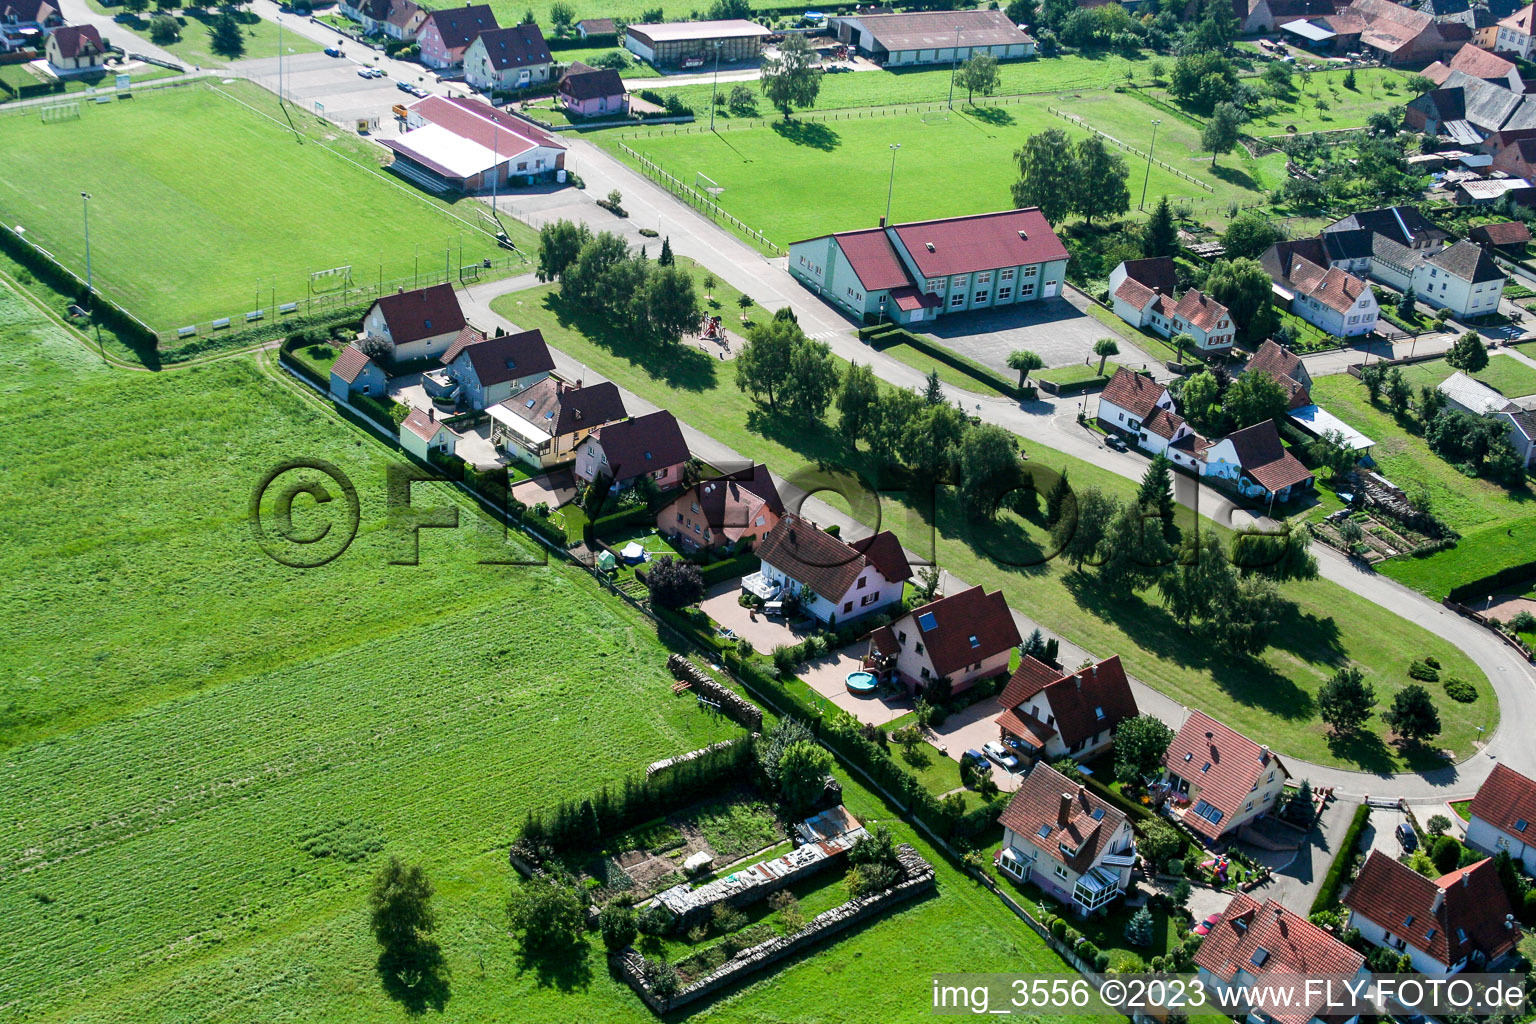 Schleithal in the state Bas-Rhin, France from the drone perspective